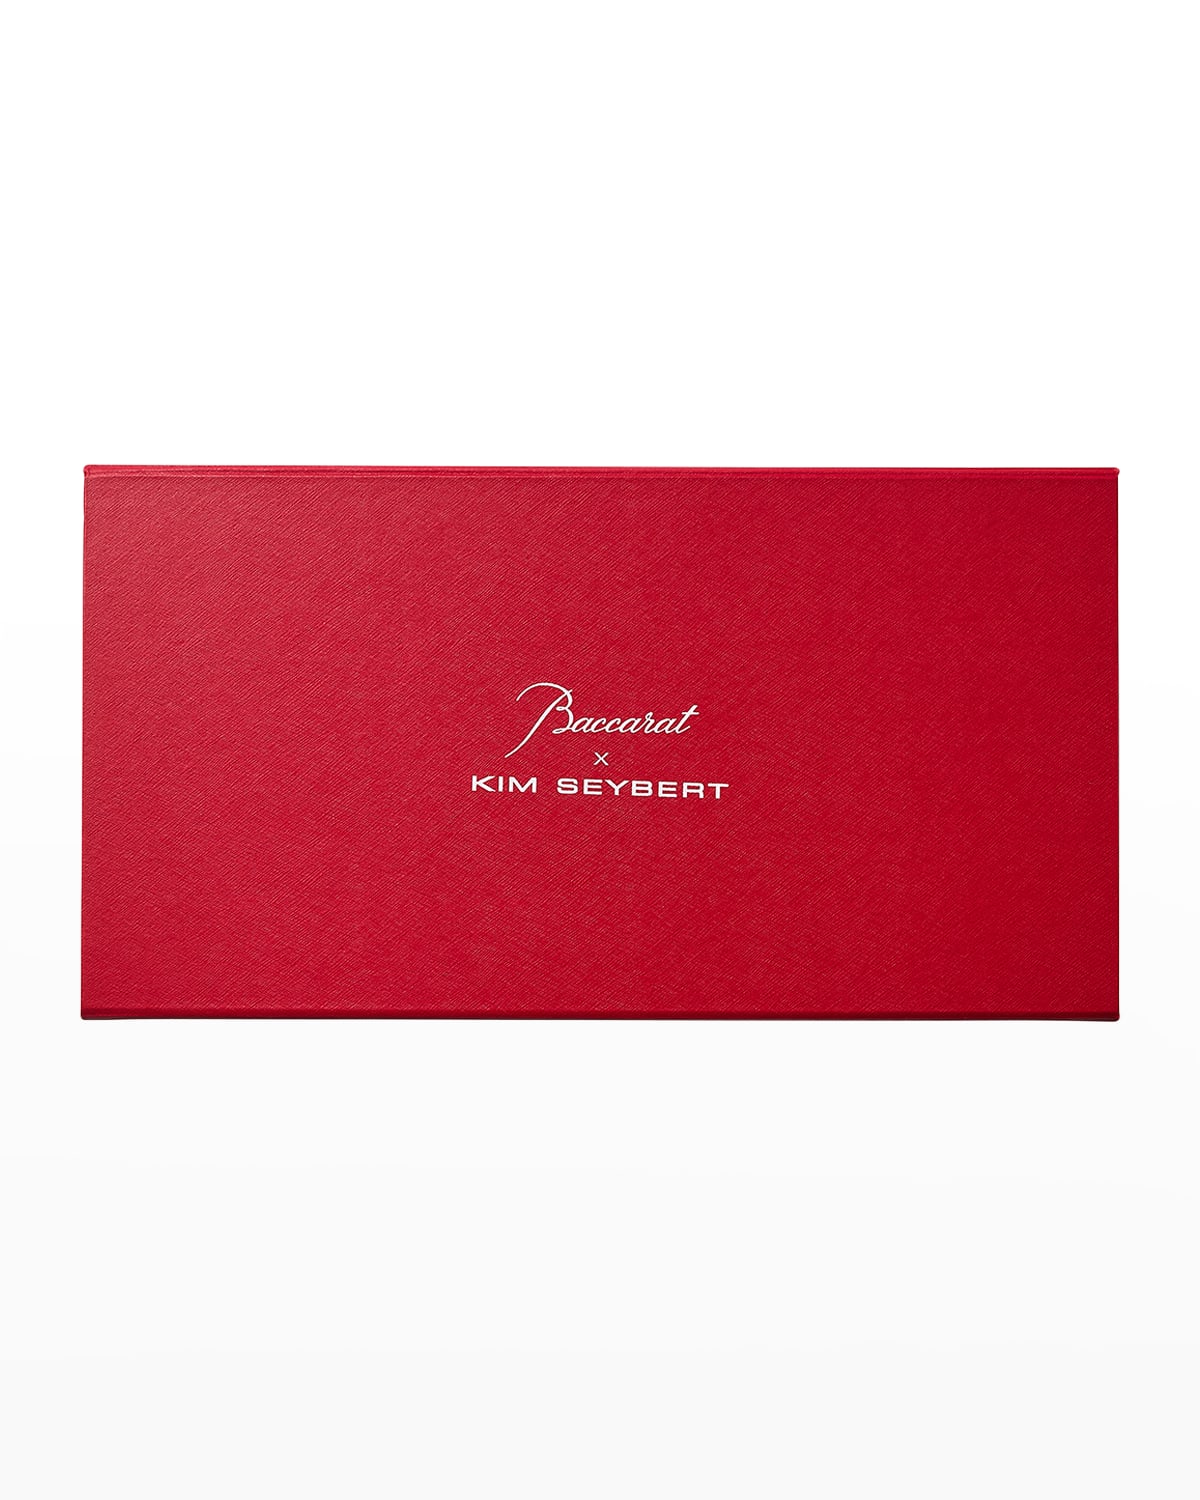 x Baccarat Napkin Box, Yours with any $176 Purchase of Harmonie or Louxor Napkins